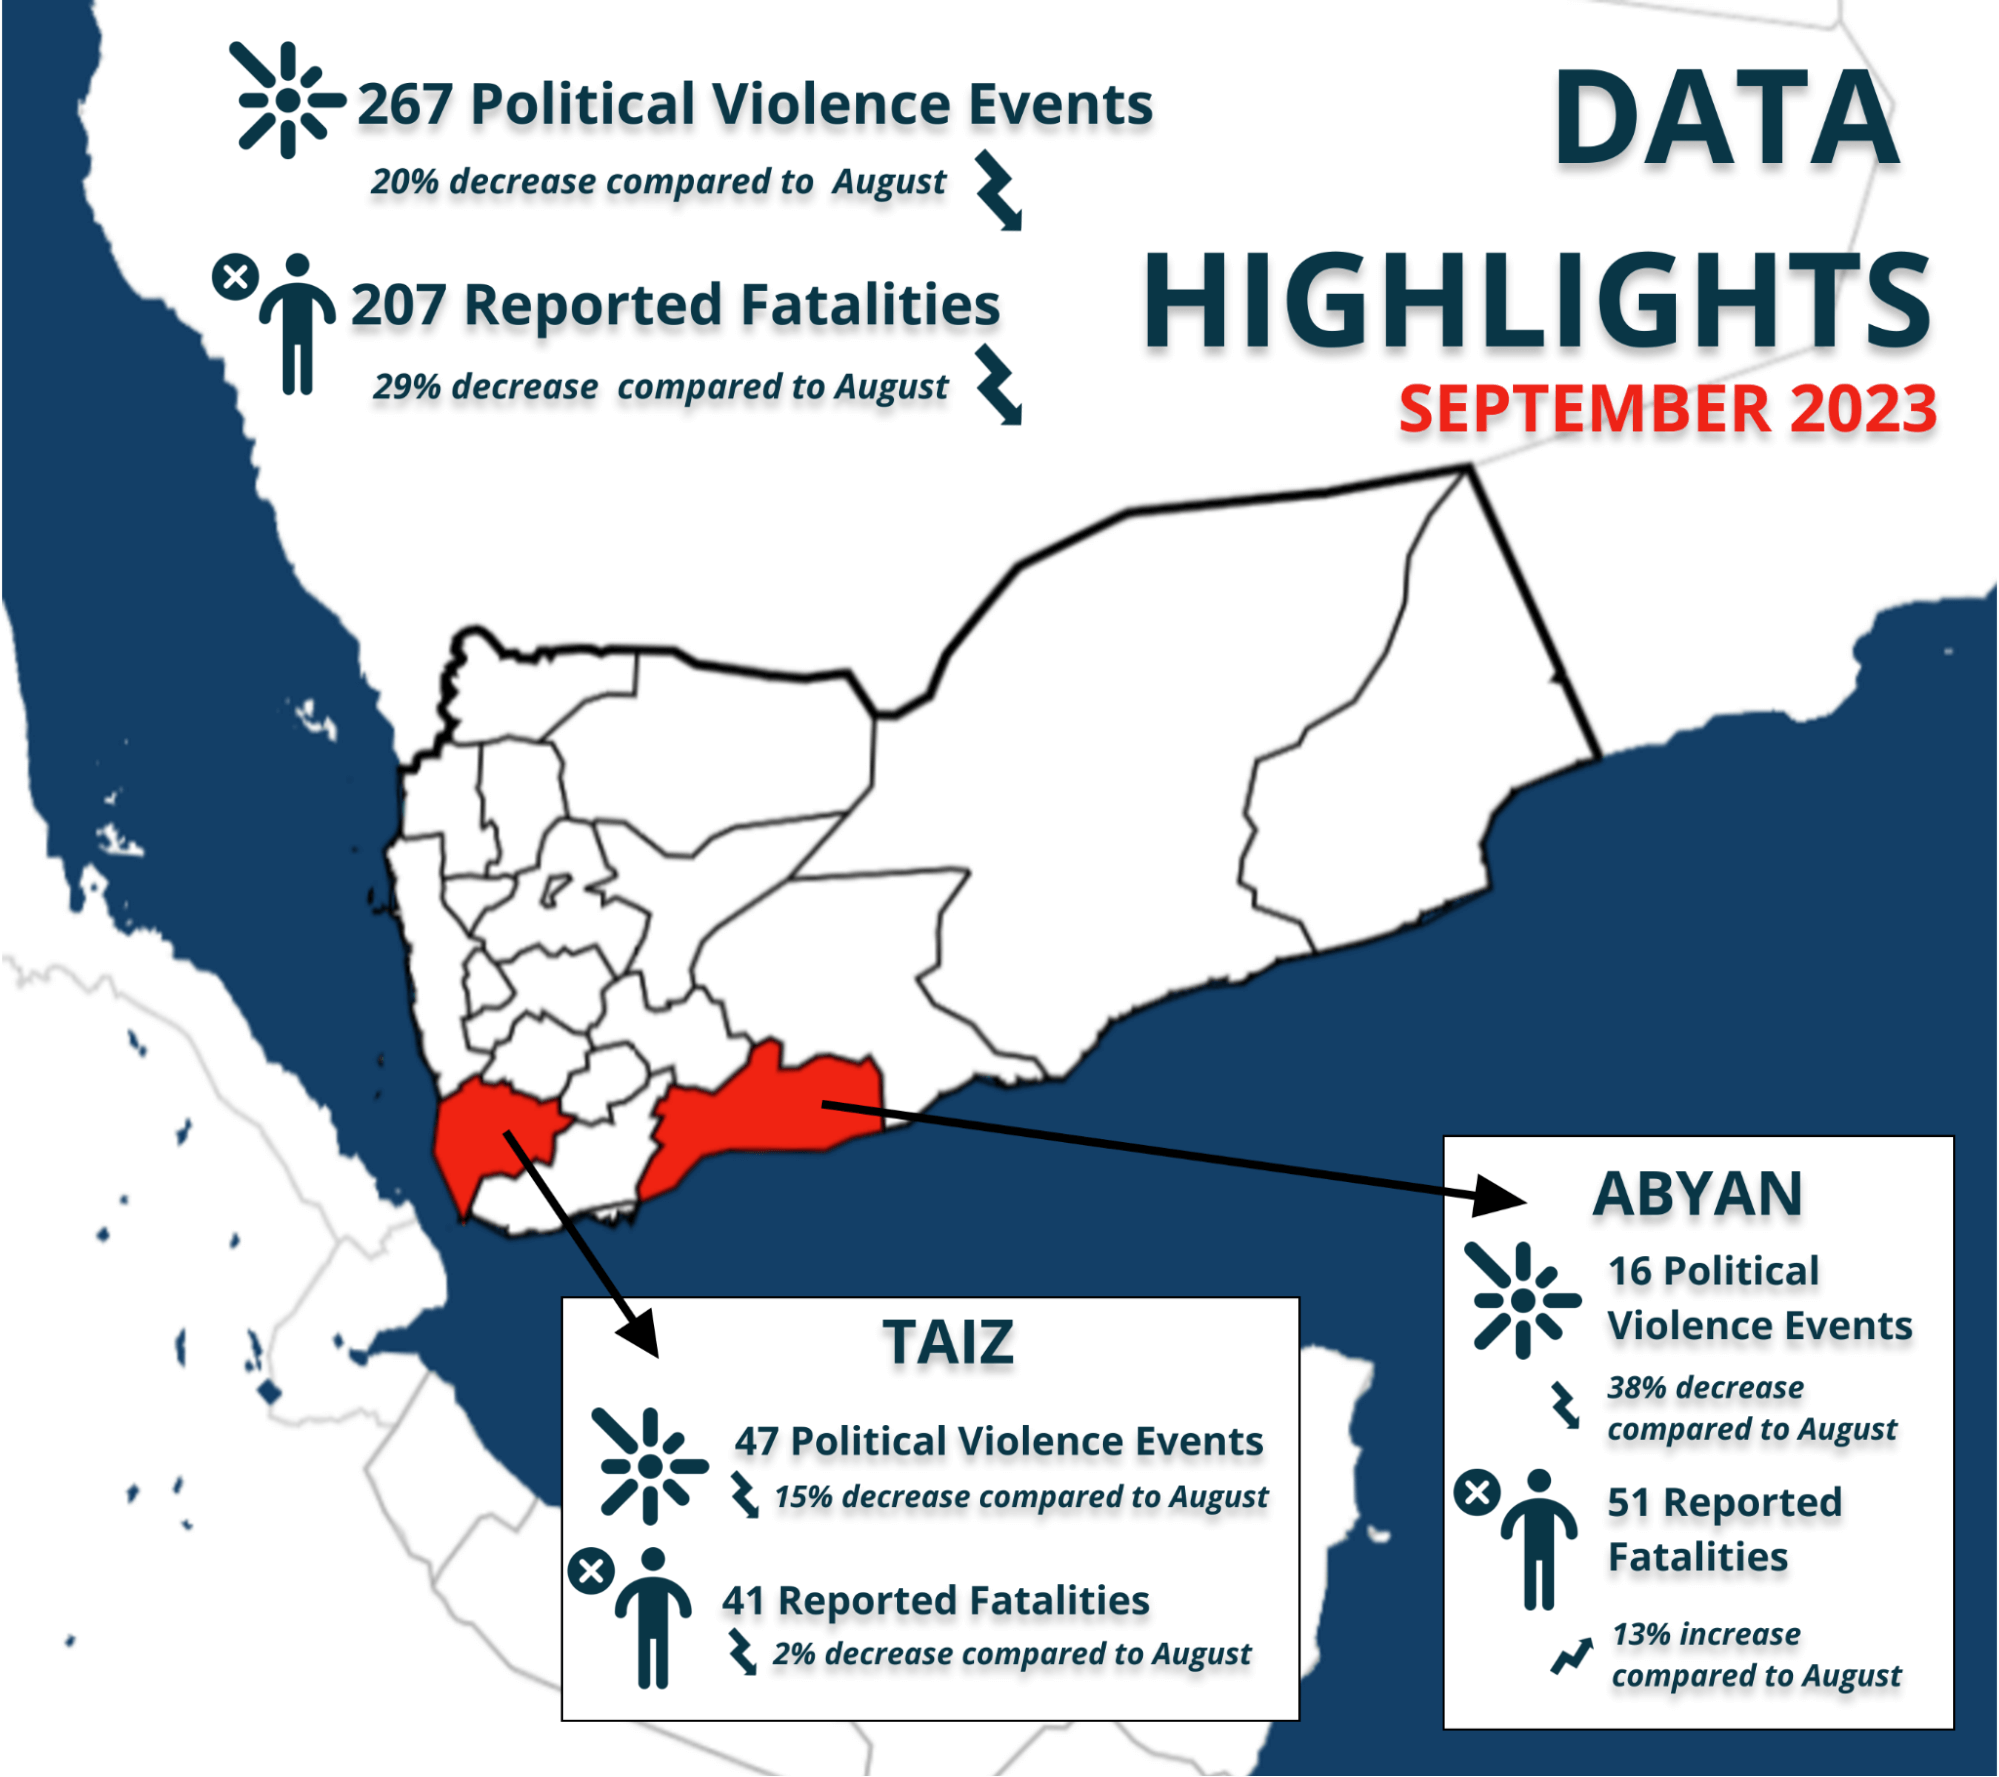 Yemen Data highlights, political violence events and reported fatalities in September 2023